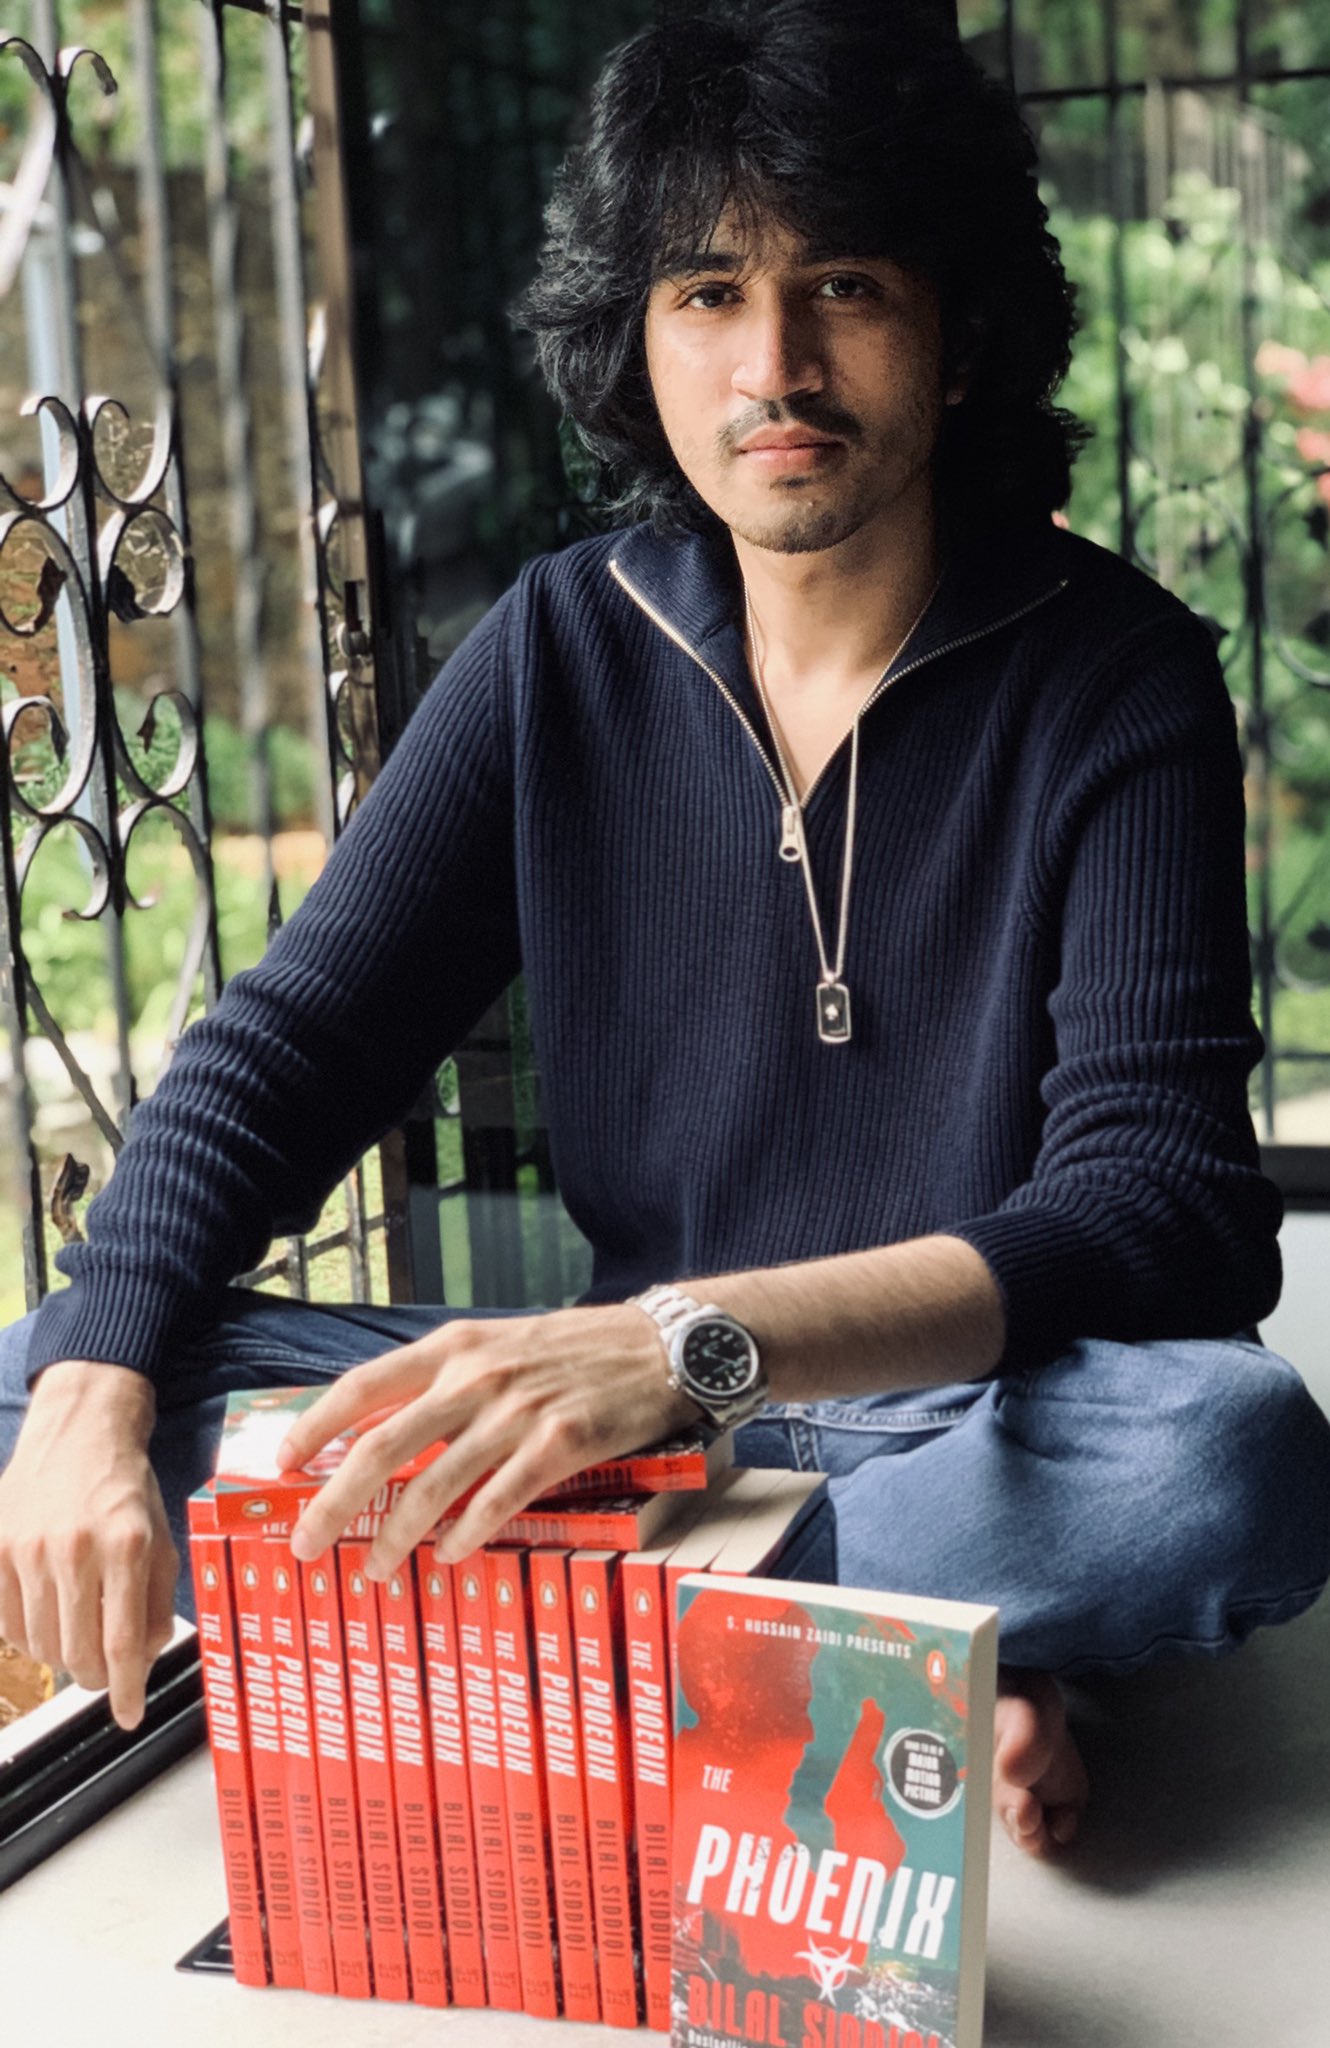 Bilal Siddiqi on X: "Hot off the press! 🔥 My next book - #ThePhoenix. @PenguinIndia @Shussainzaidi 📚 Order now: https://t.co/FTteeljyGO https://t.co/sD20ZuhuwY" / X